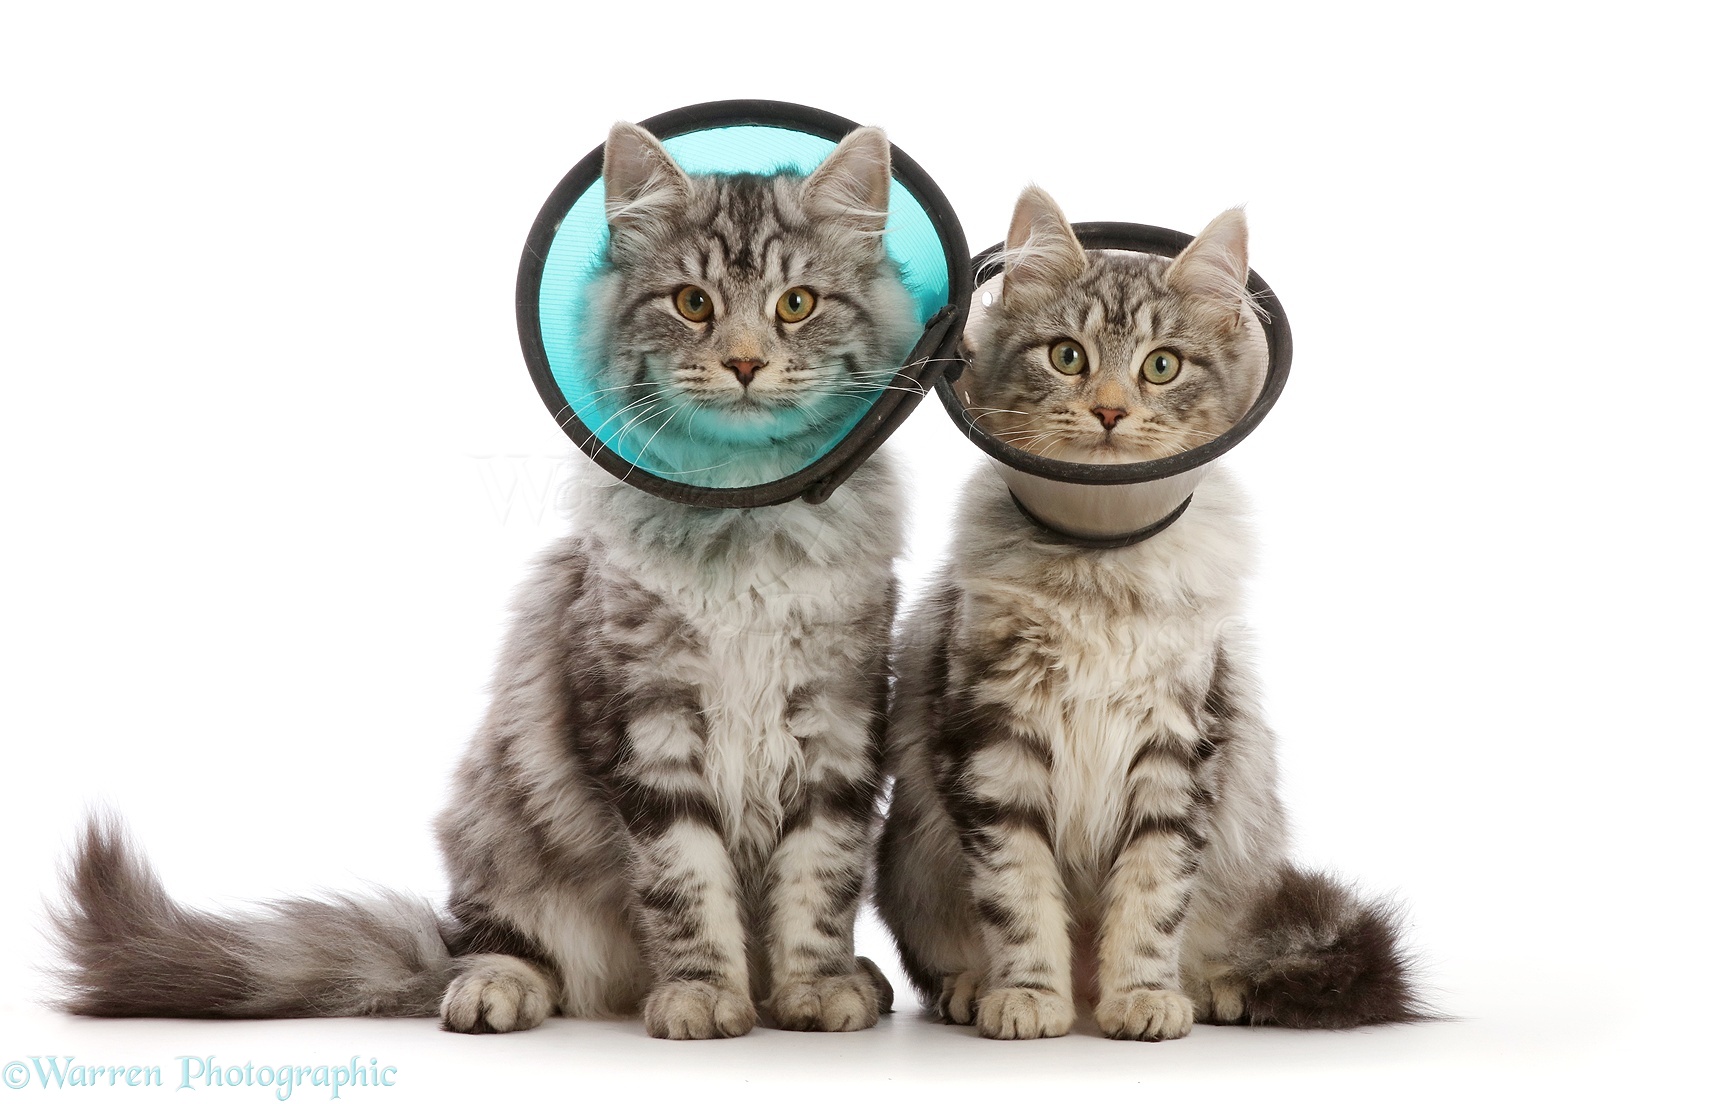 Silver tabby cats with Elizabethan wound healing cone collars photo WP45538